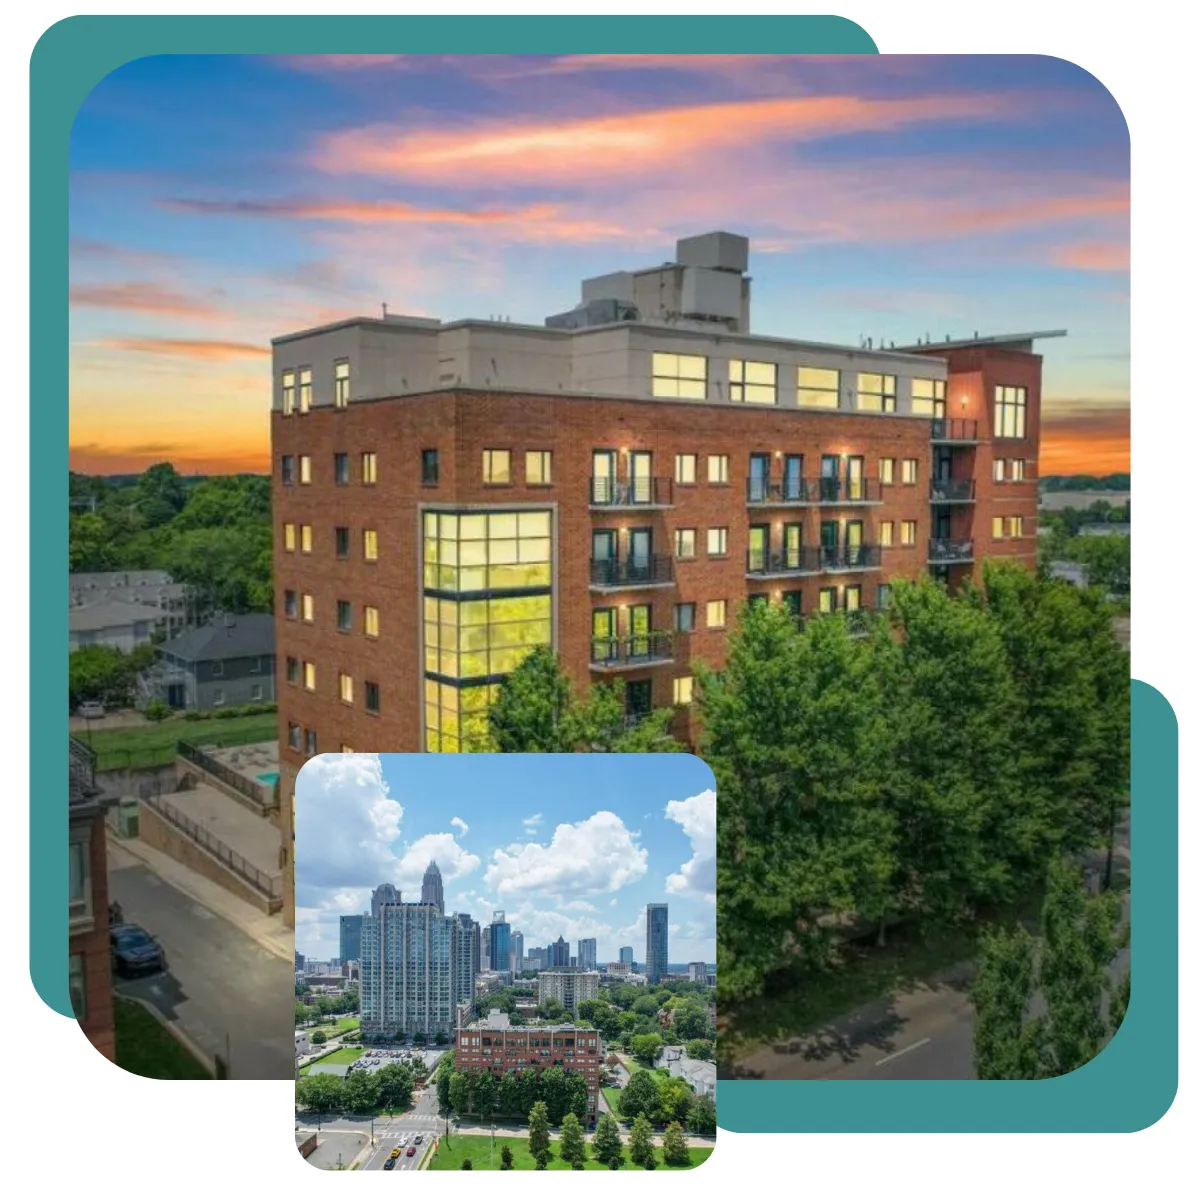 Discover the charm of Urban Condo, a trendy 2-bed home in Uptown CLT, close to downtown's buzz with dining, clubs, and sports nearby.